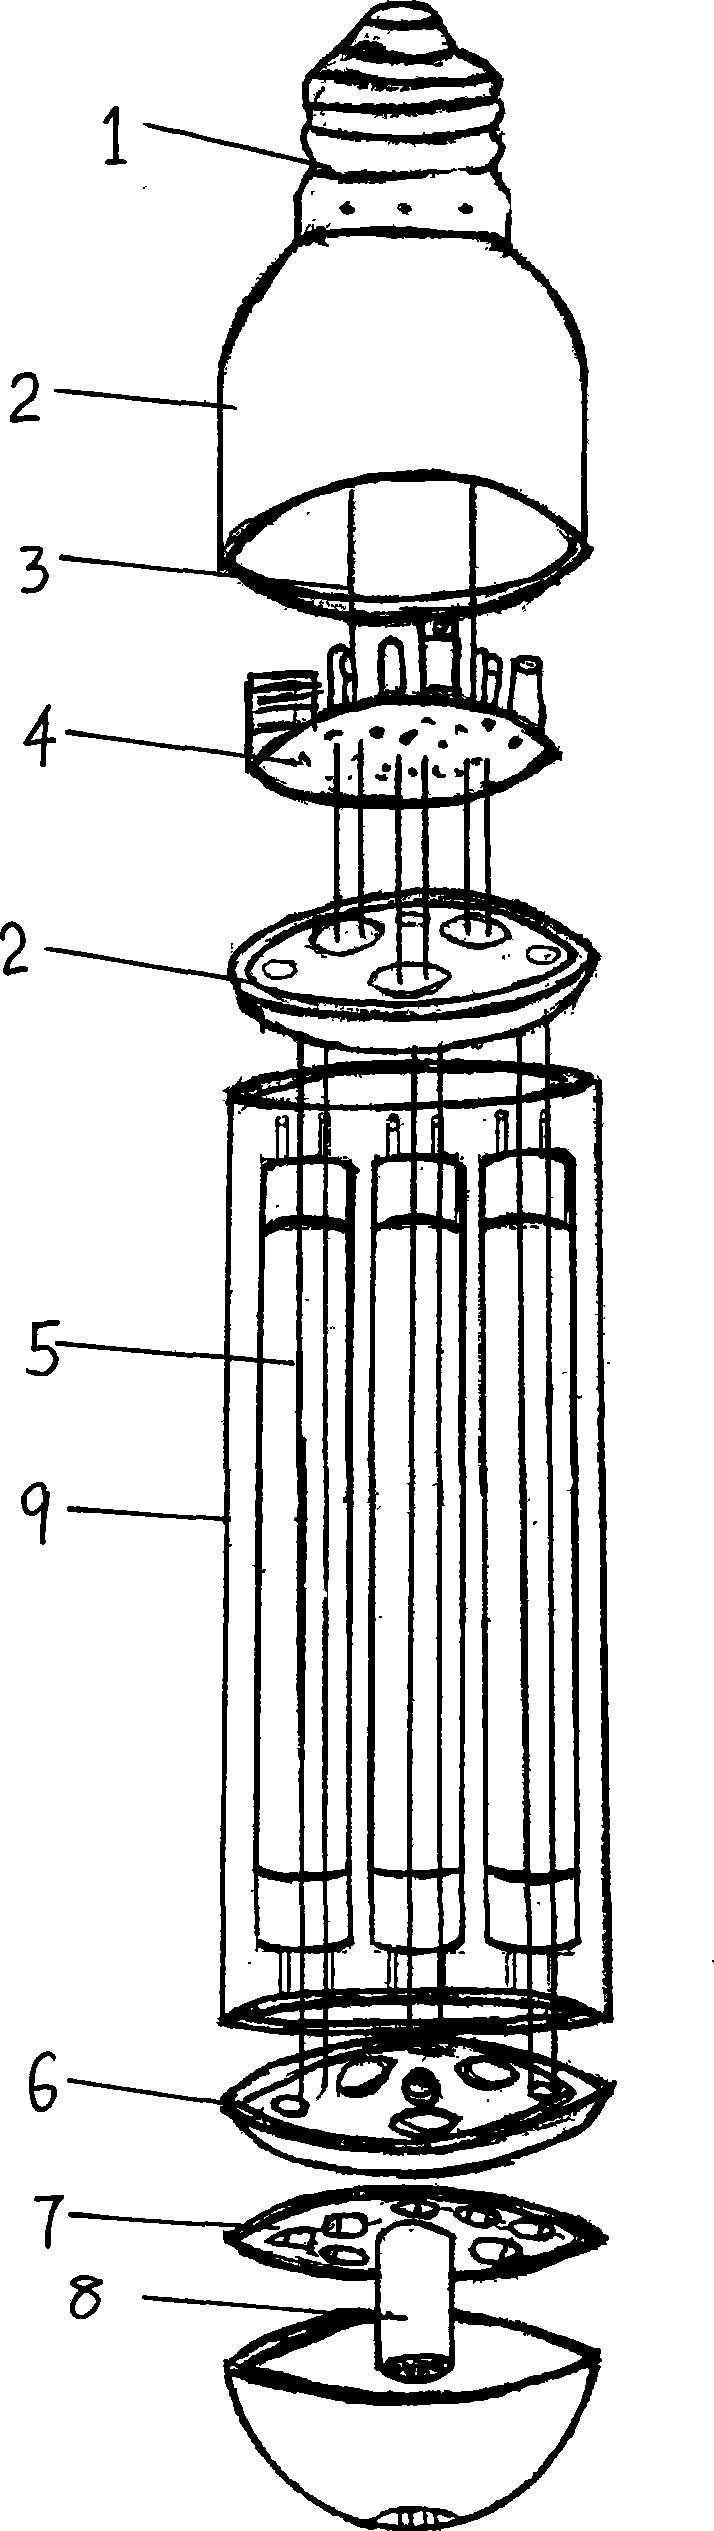 Pipe-in-pipe anion energy-saving lamp tube device